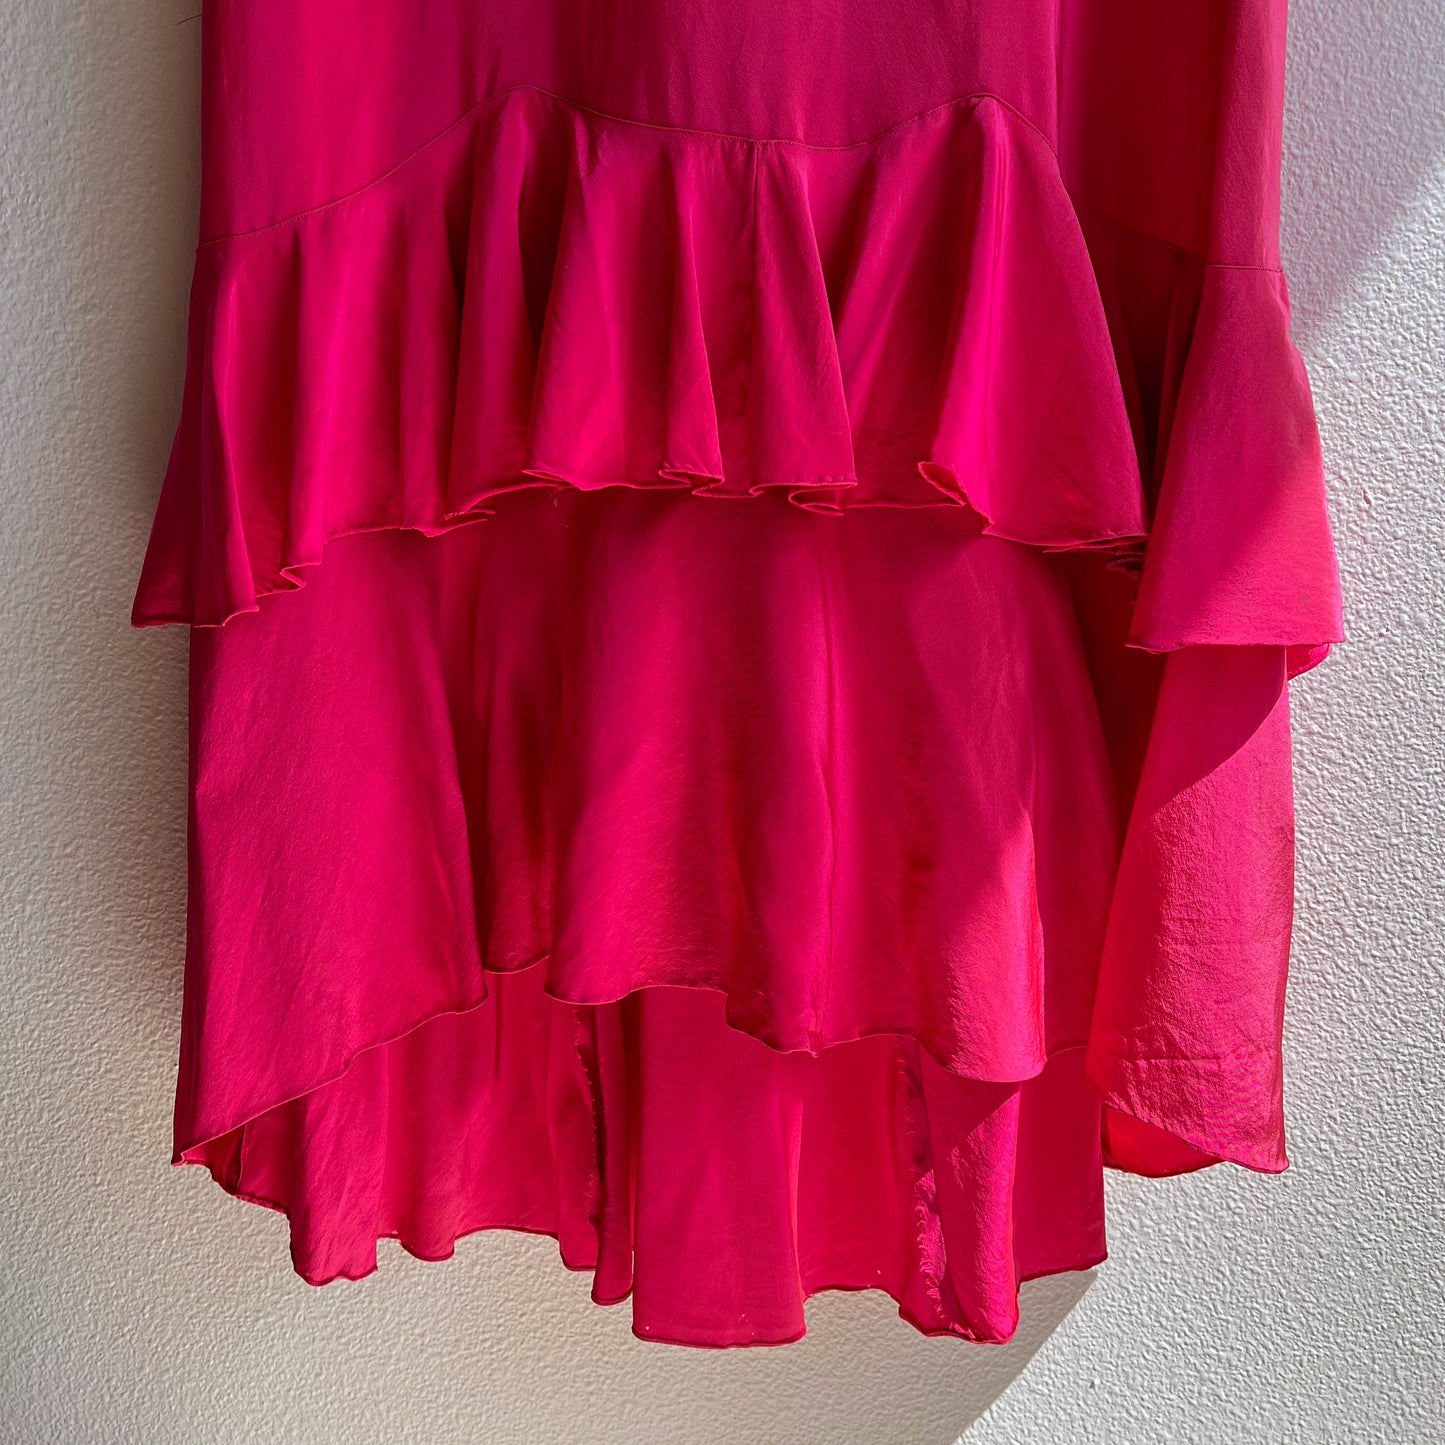 Reworked 1930s Hot Pink Silk Gown (XS/S)